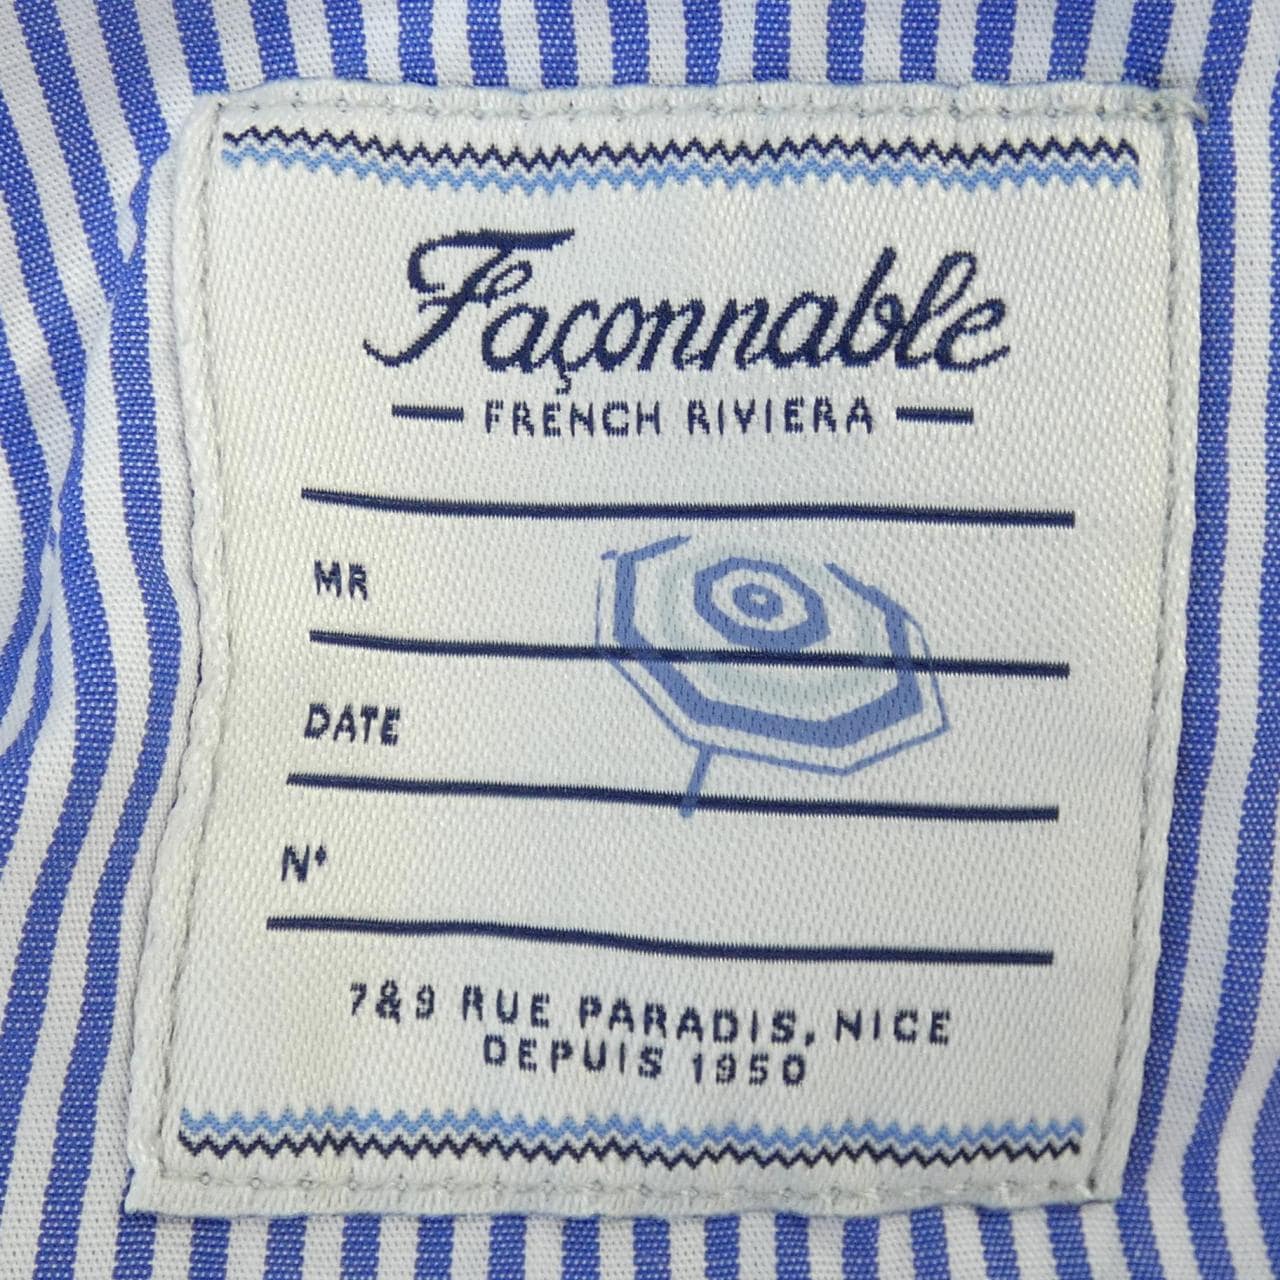 FACONNABLE pants